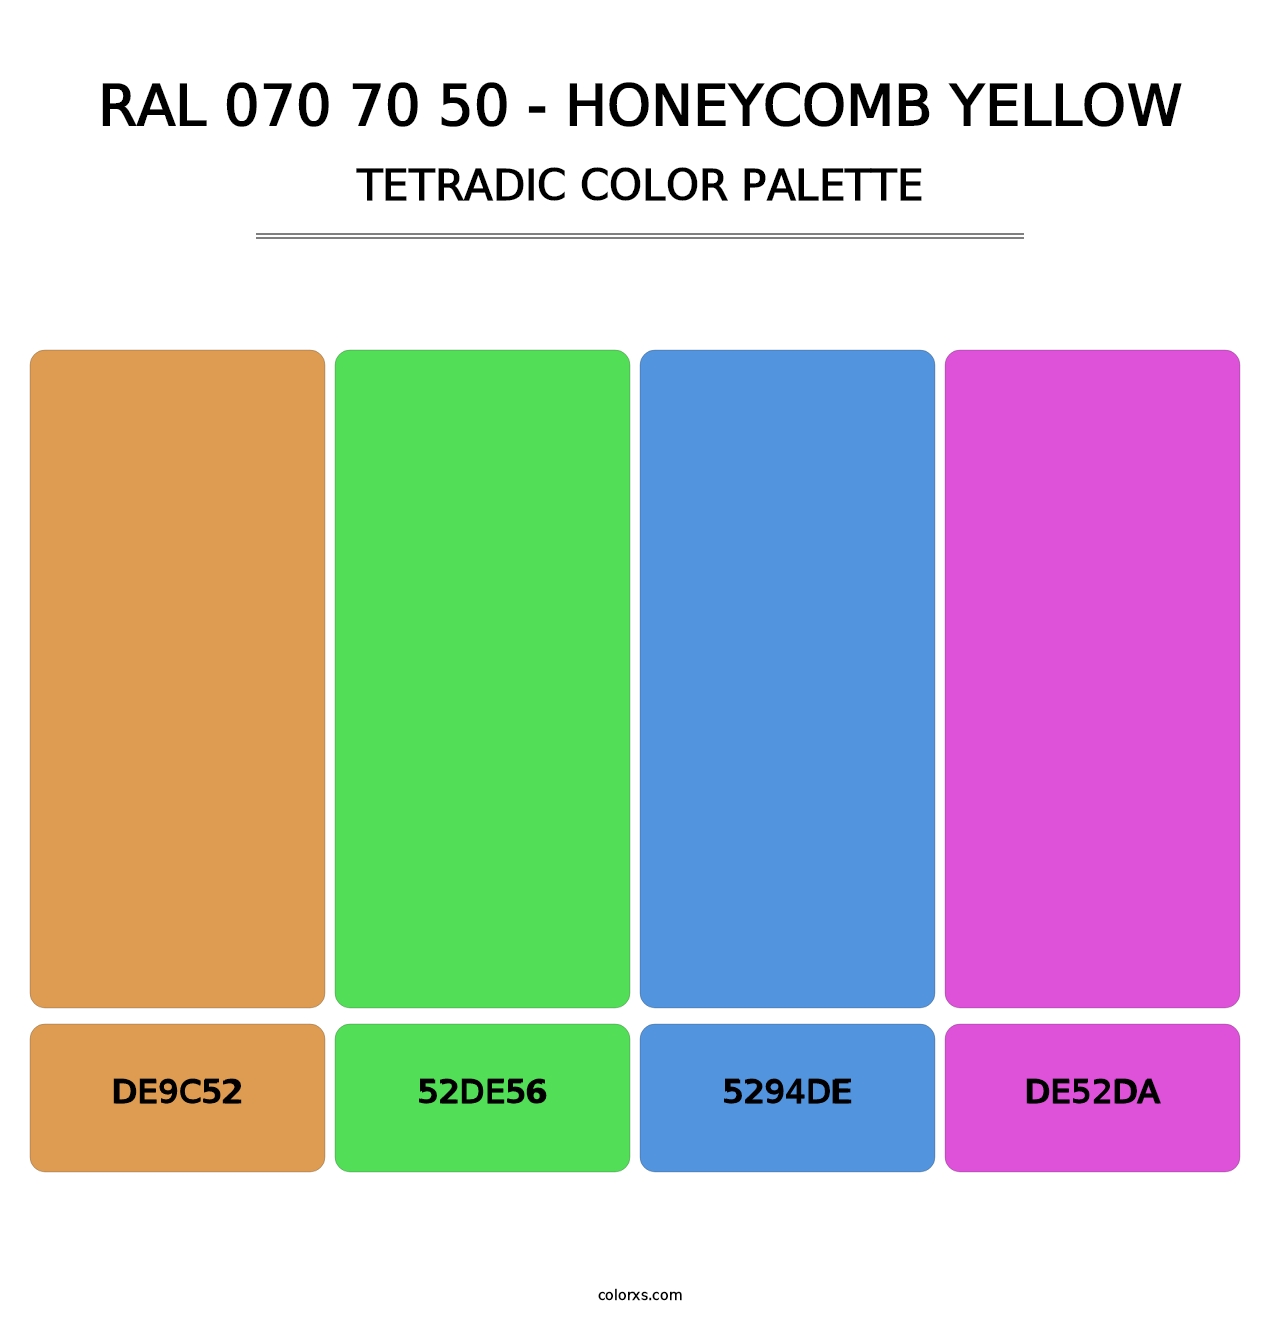 RAL 070 70 50 - Honeycomb Yellow - Tetradic Color Palette